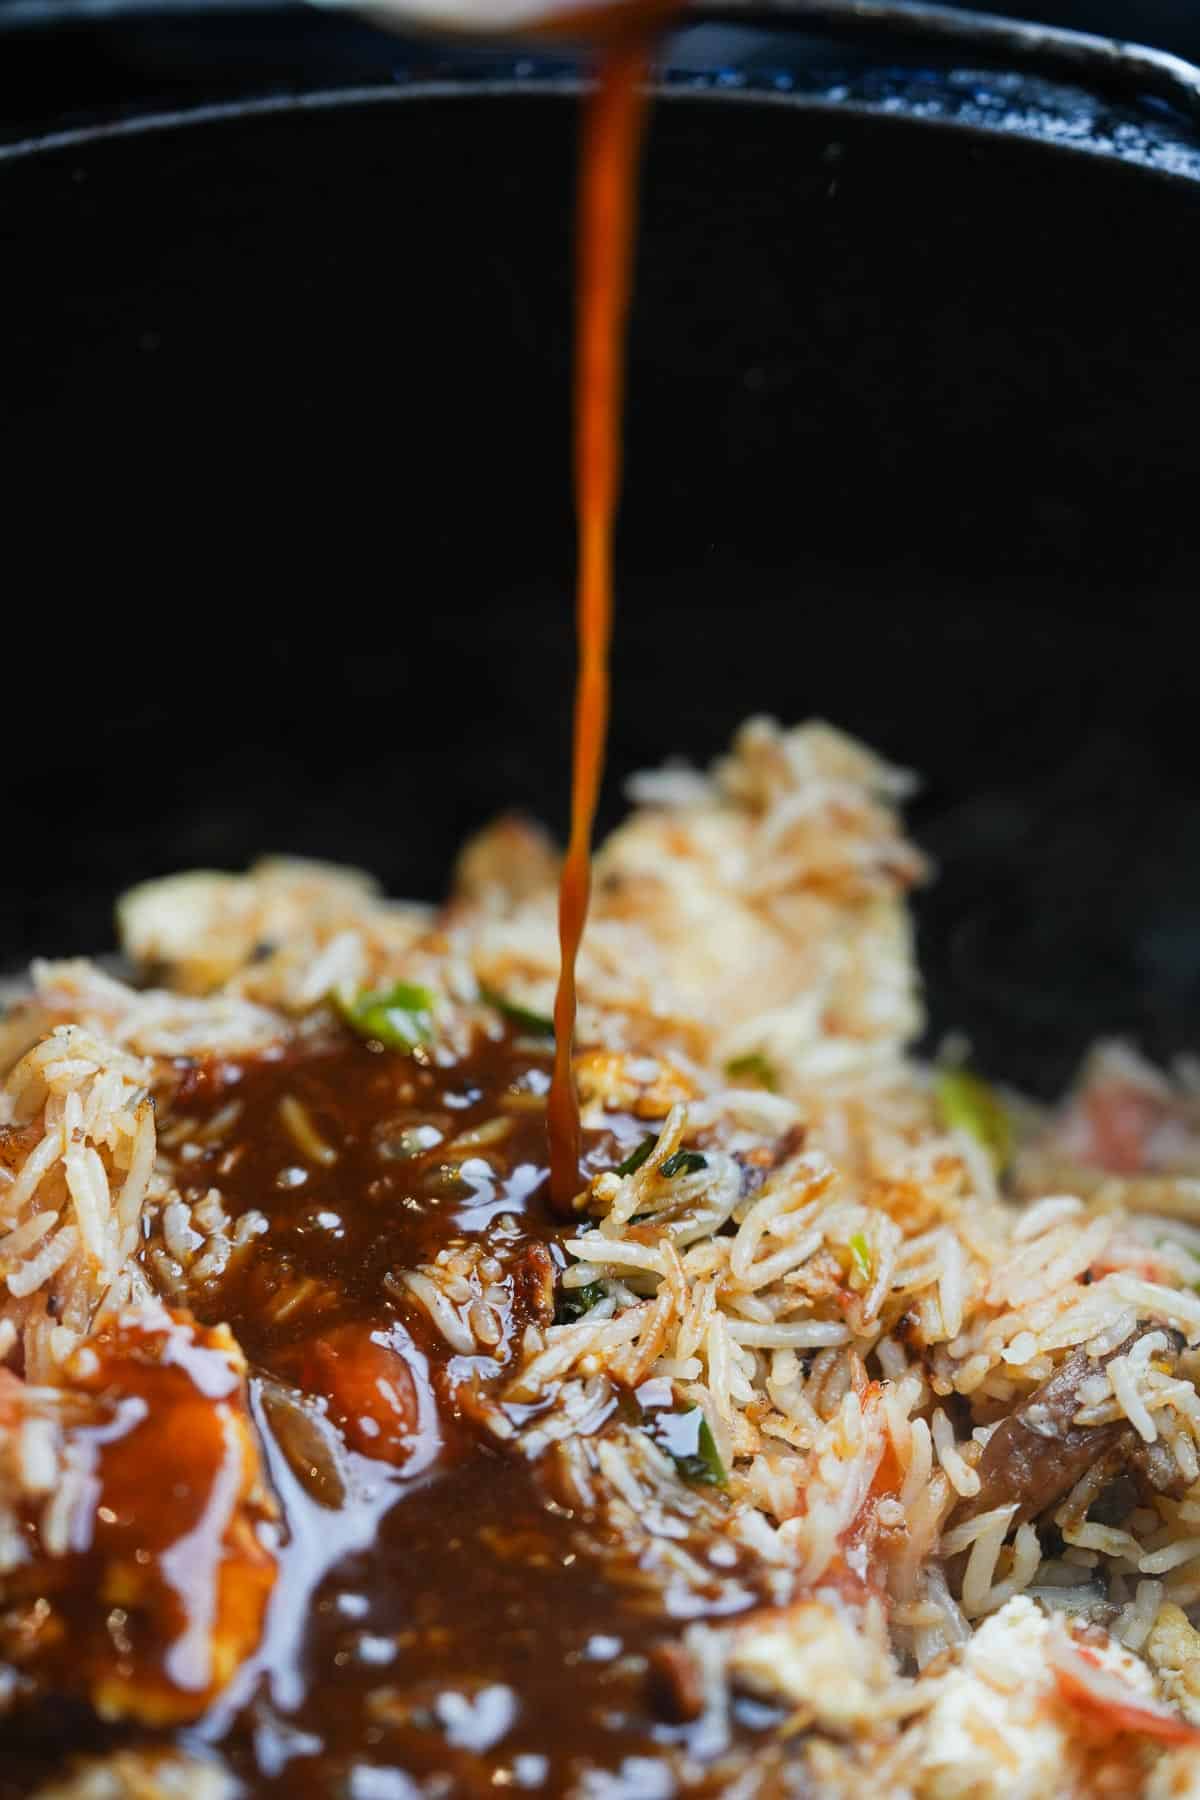 Fried rice being drizzled with stir-fry sauce.